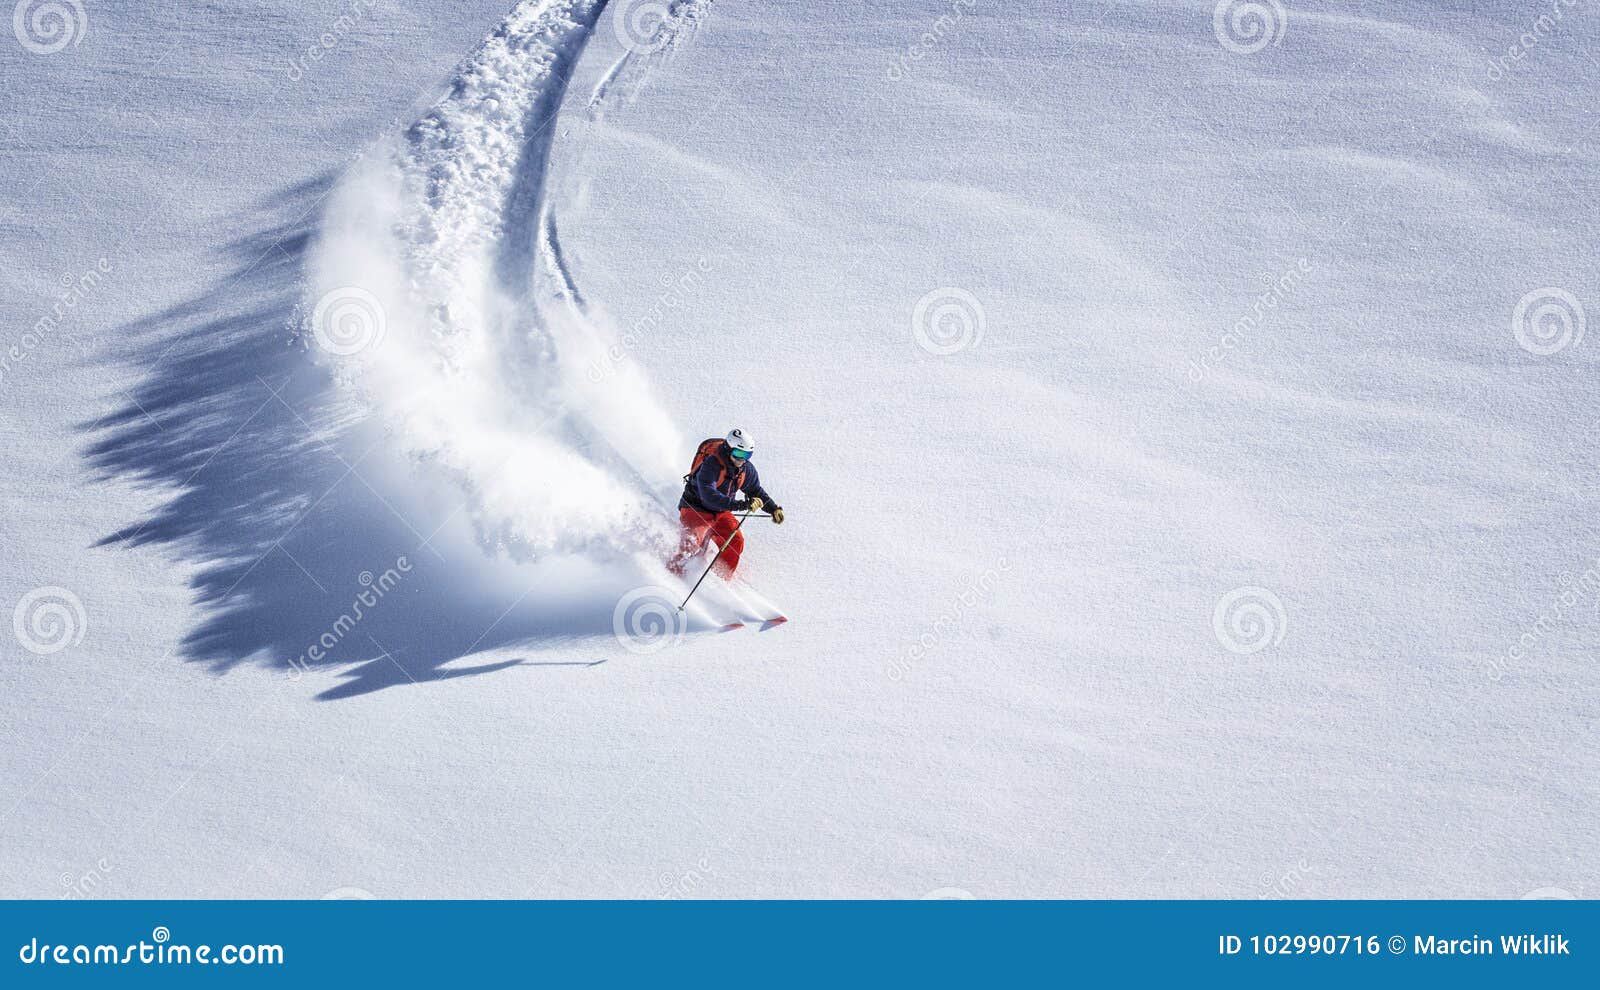 Extreme Skier Charging Down Steep Slope Stock Photo - Image of morning ...